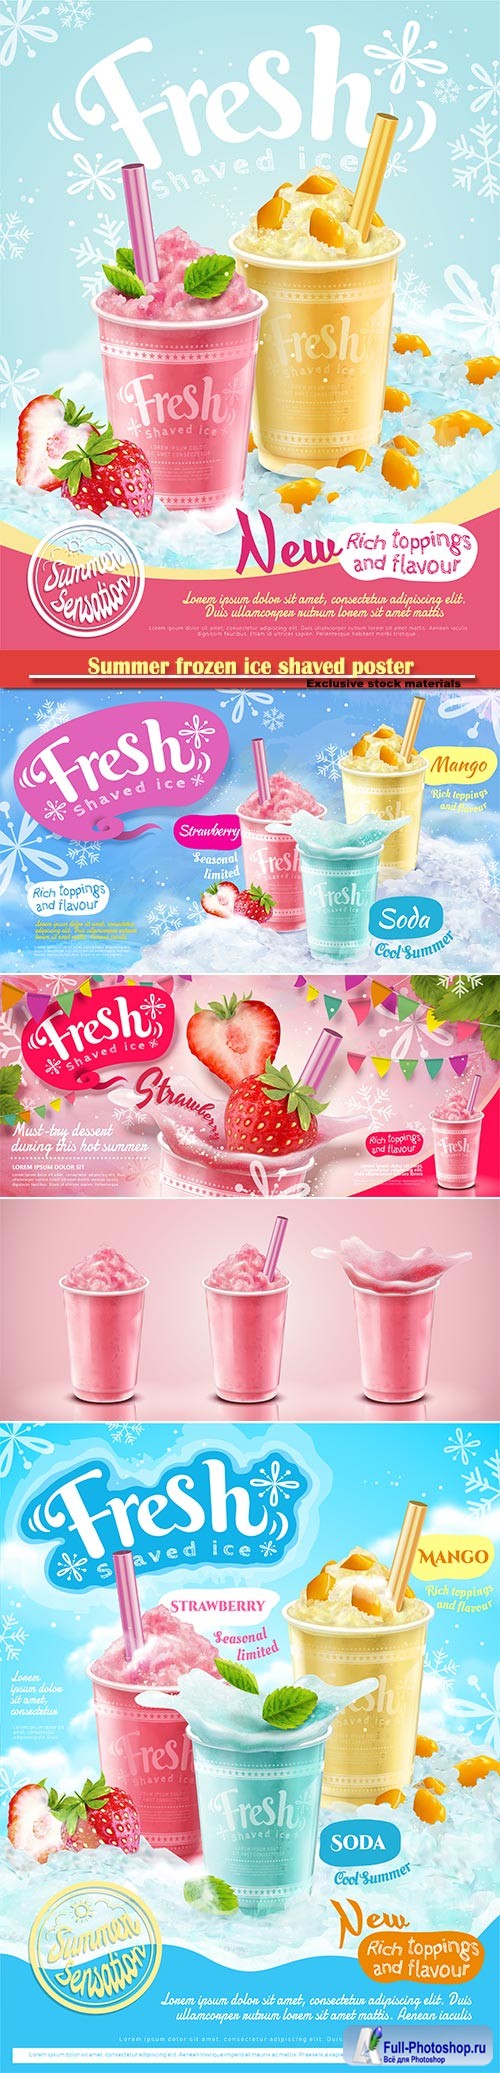 Summer frozen ice shaved poster with refreshing fruit and toppings in 3d illustration